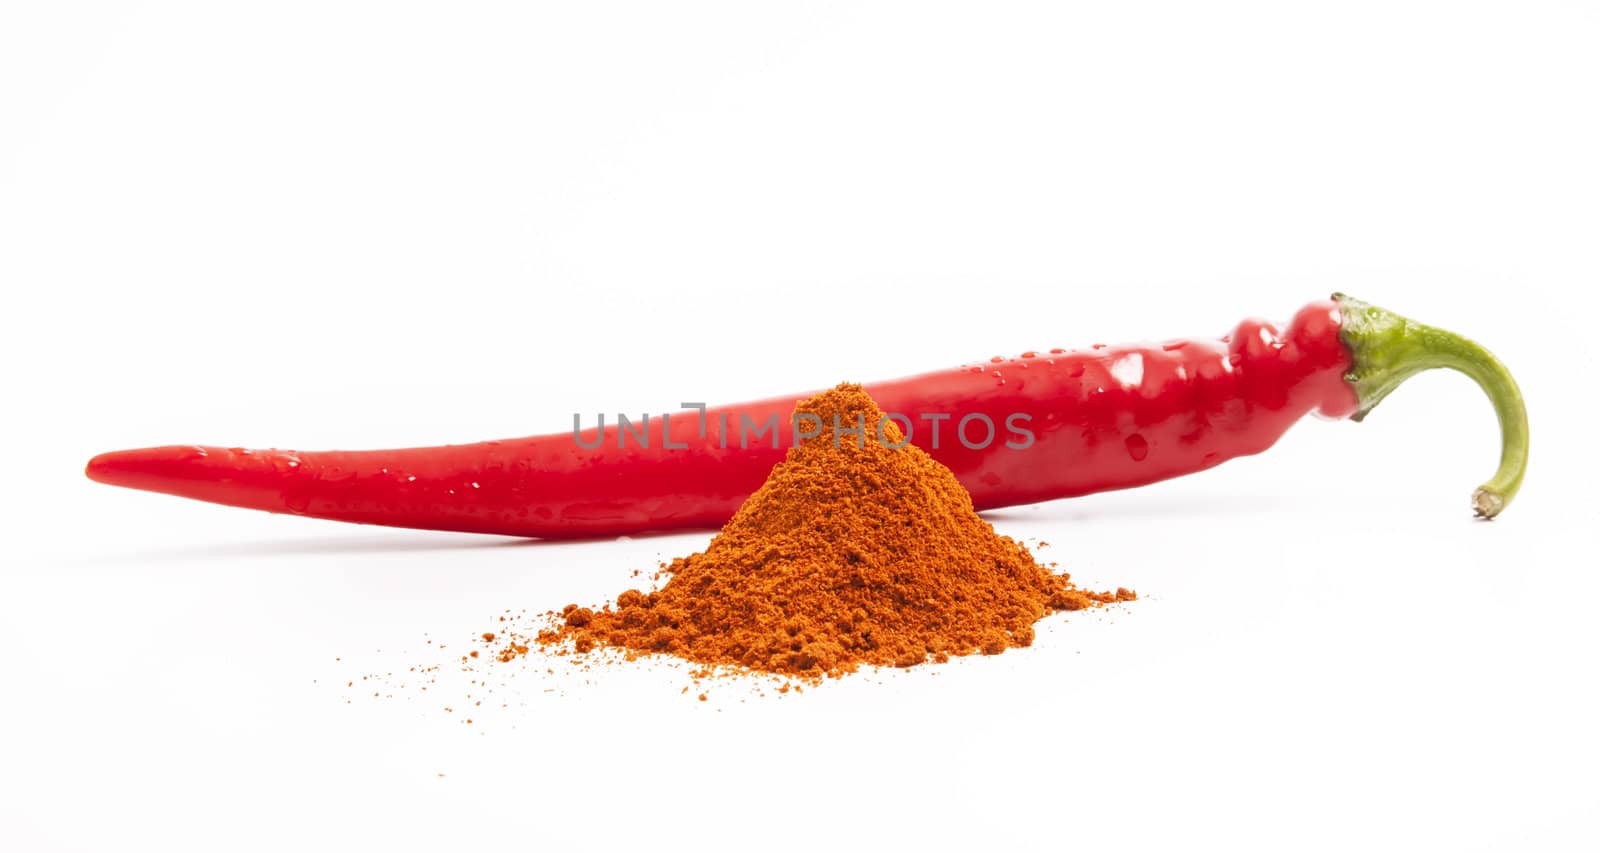 Red chili pepper and pile of paprika spice on white background